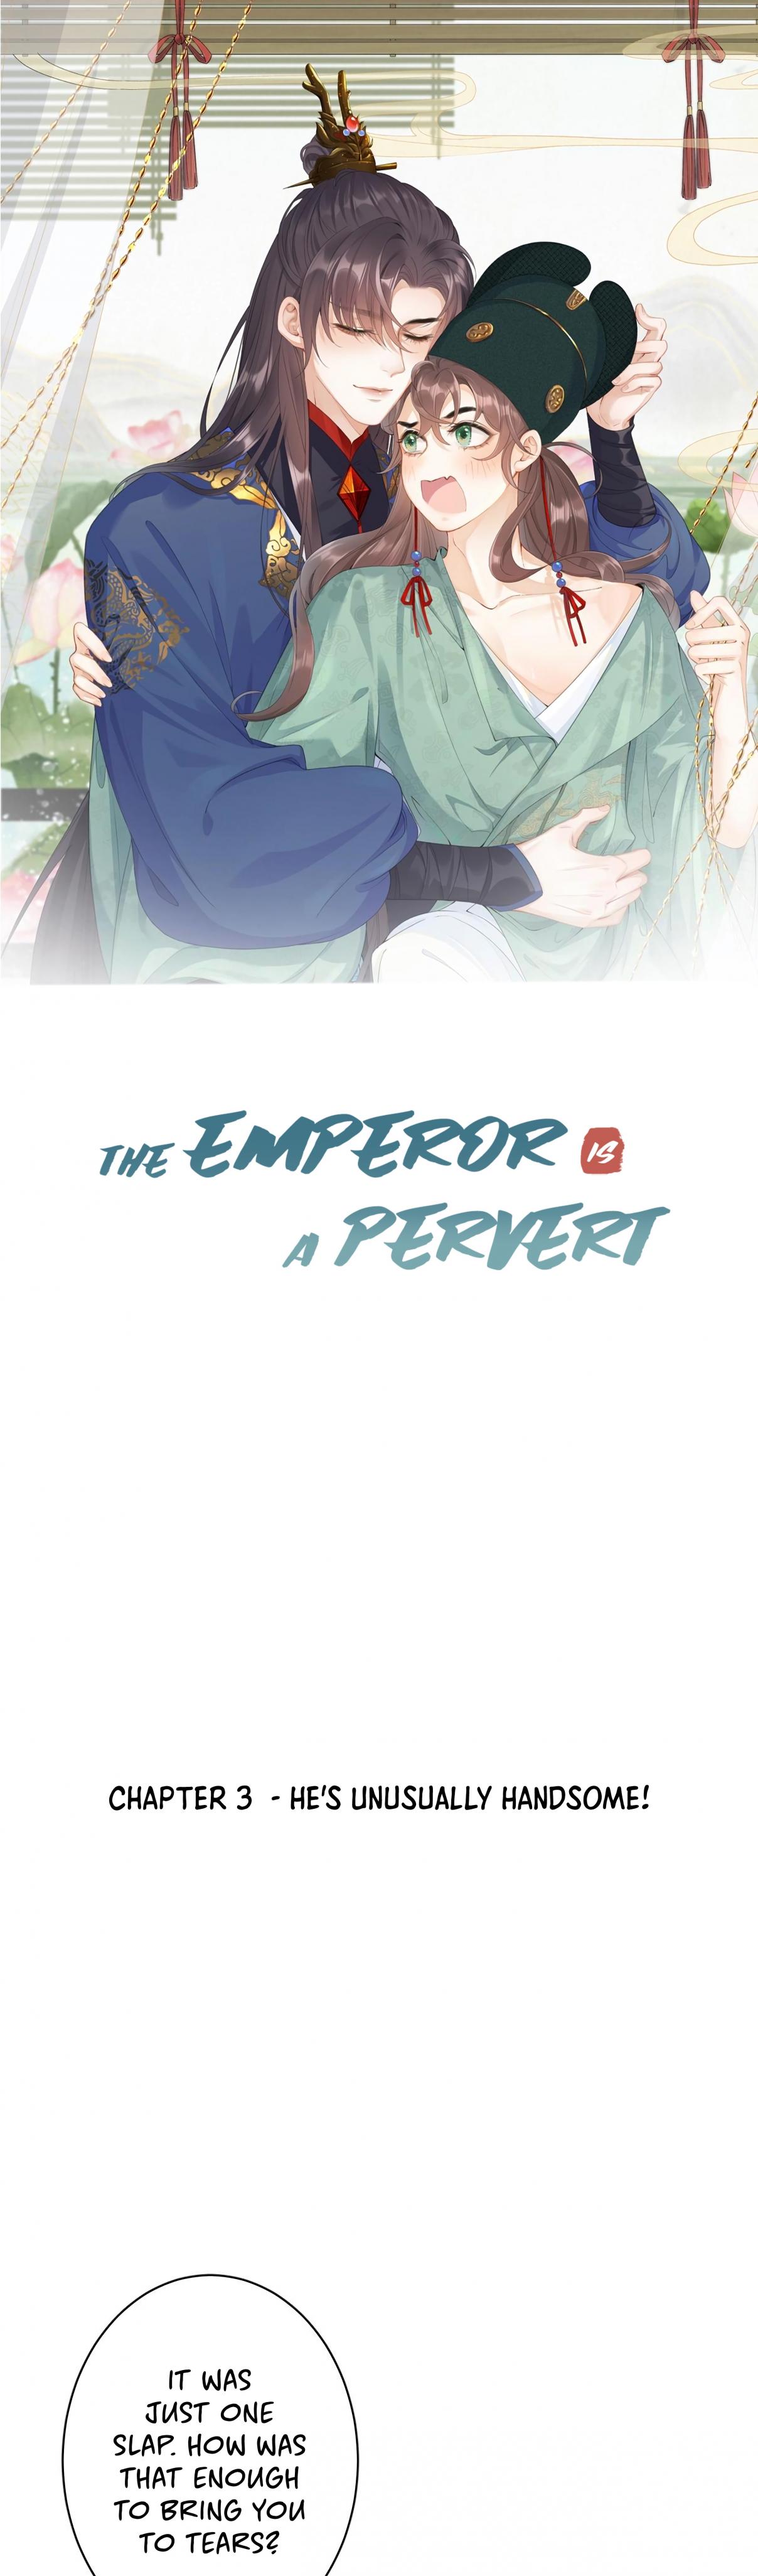 The Emperor is a Pervert! 3